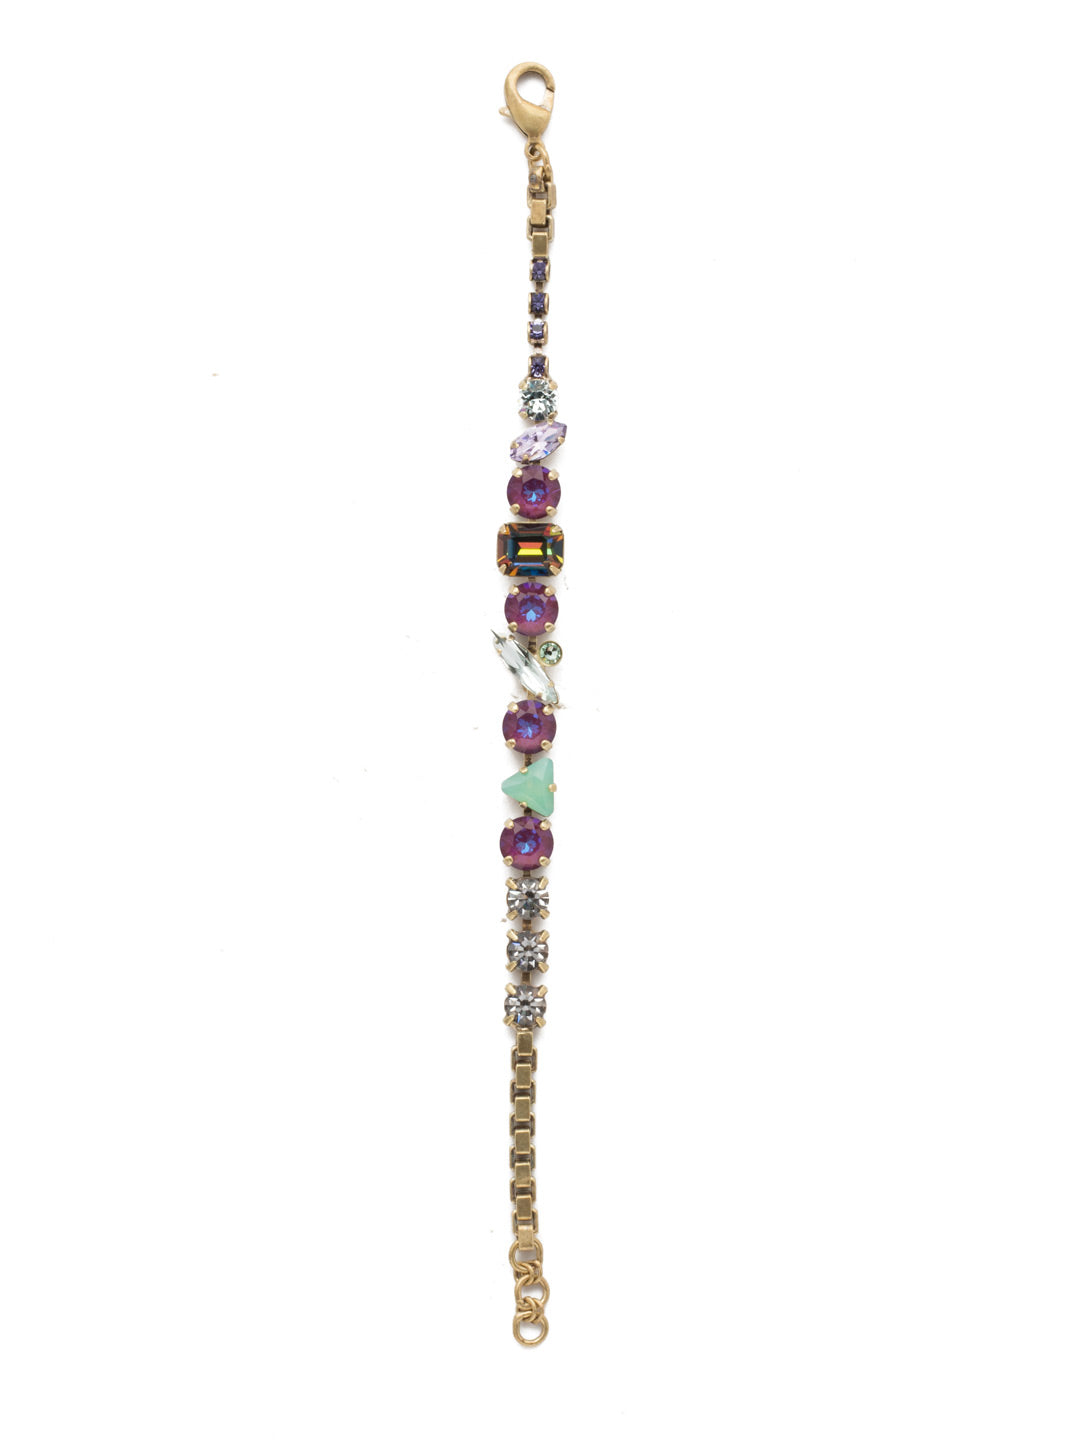 Louisa Tennis Bracelet - BEN16AGIRB - The Louisa Tennis Bracelet makes a fabulously sparkling statement with bright sparkling stones in all shapes and sizes. From Sorrelli's Iris Bloom collection in our Antique Gold-tone finish.